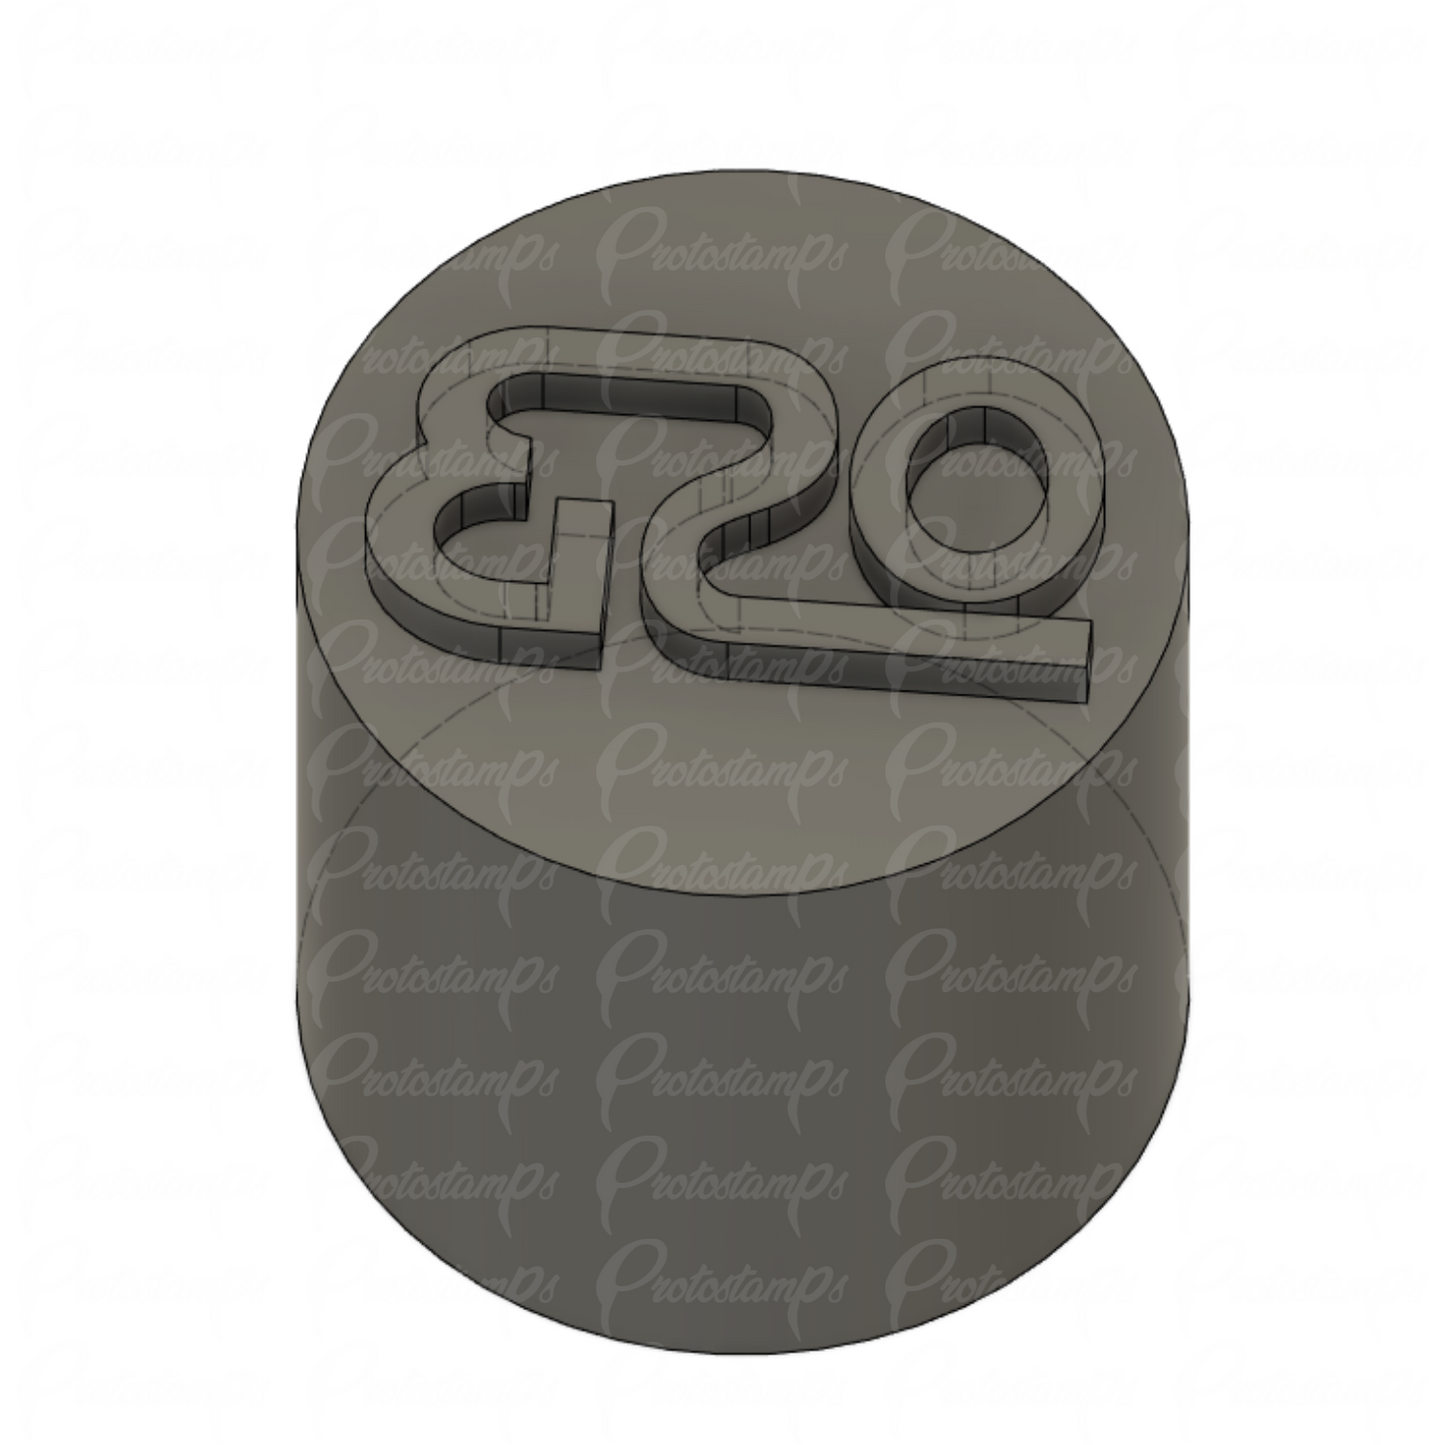 Custom 20mm Stamp, Price Includes Shipping